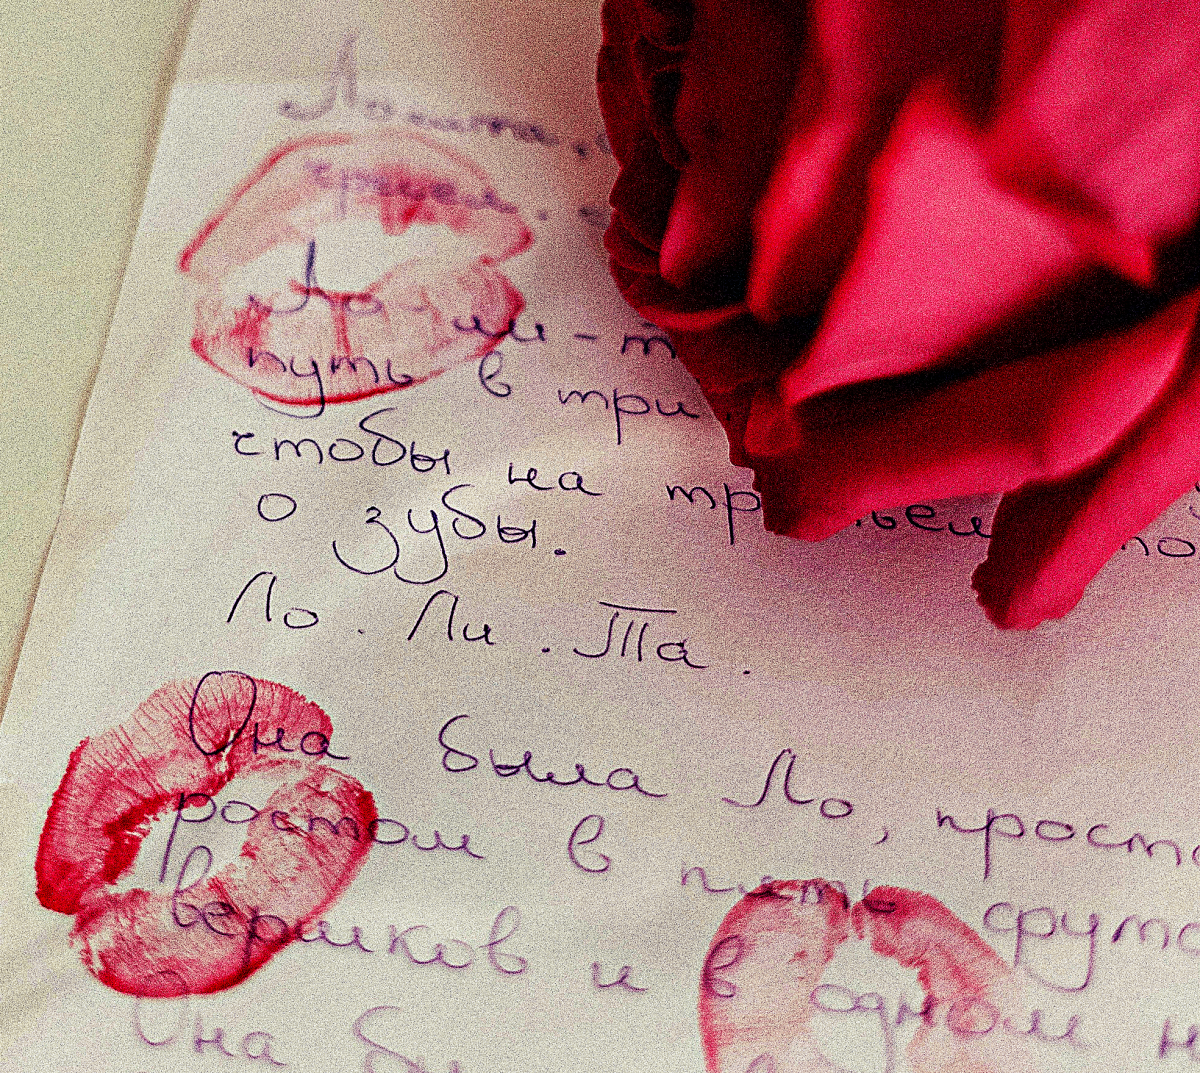 During World War 2, it was common to see letters with lipstick imprints and the acronym SWAK (or SWALK) outside the envelope. It stood for "sealed with a (loving) kiss." Not much has changed since, but the origins of this phrase are far less romantic